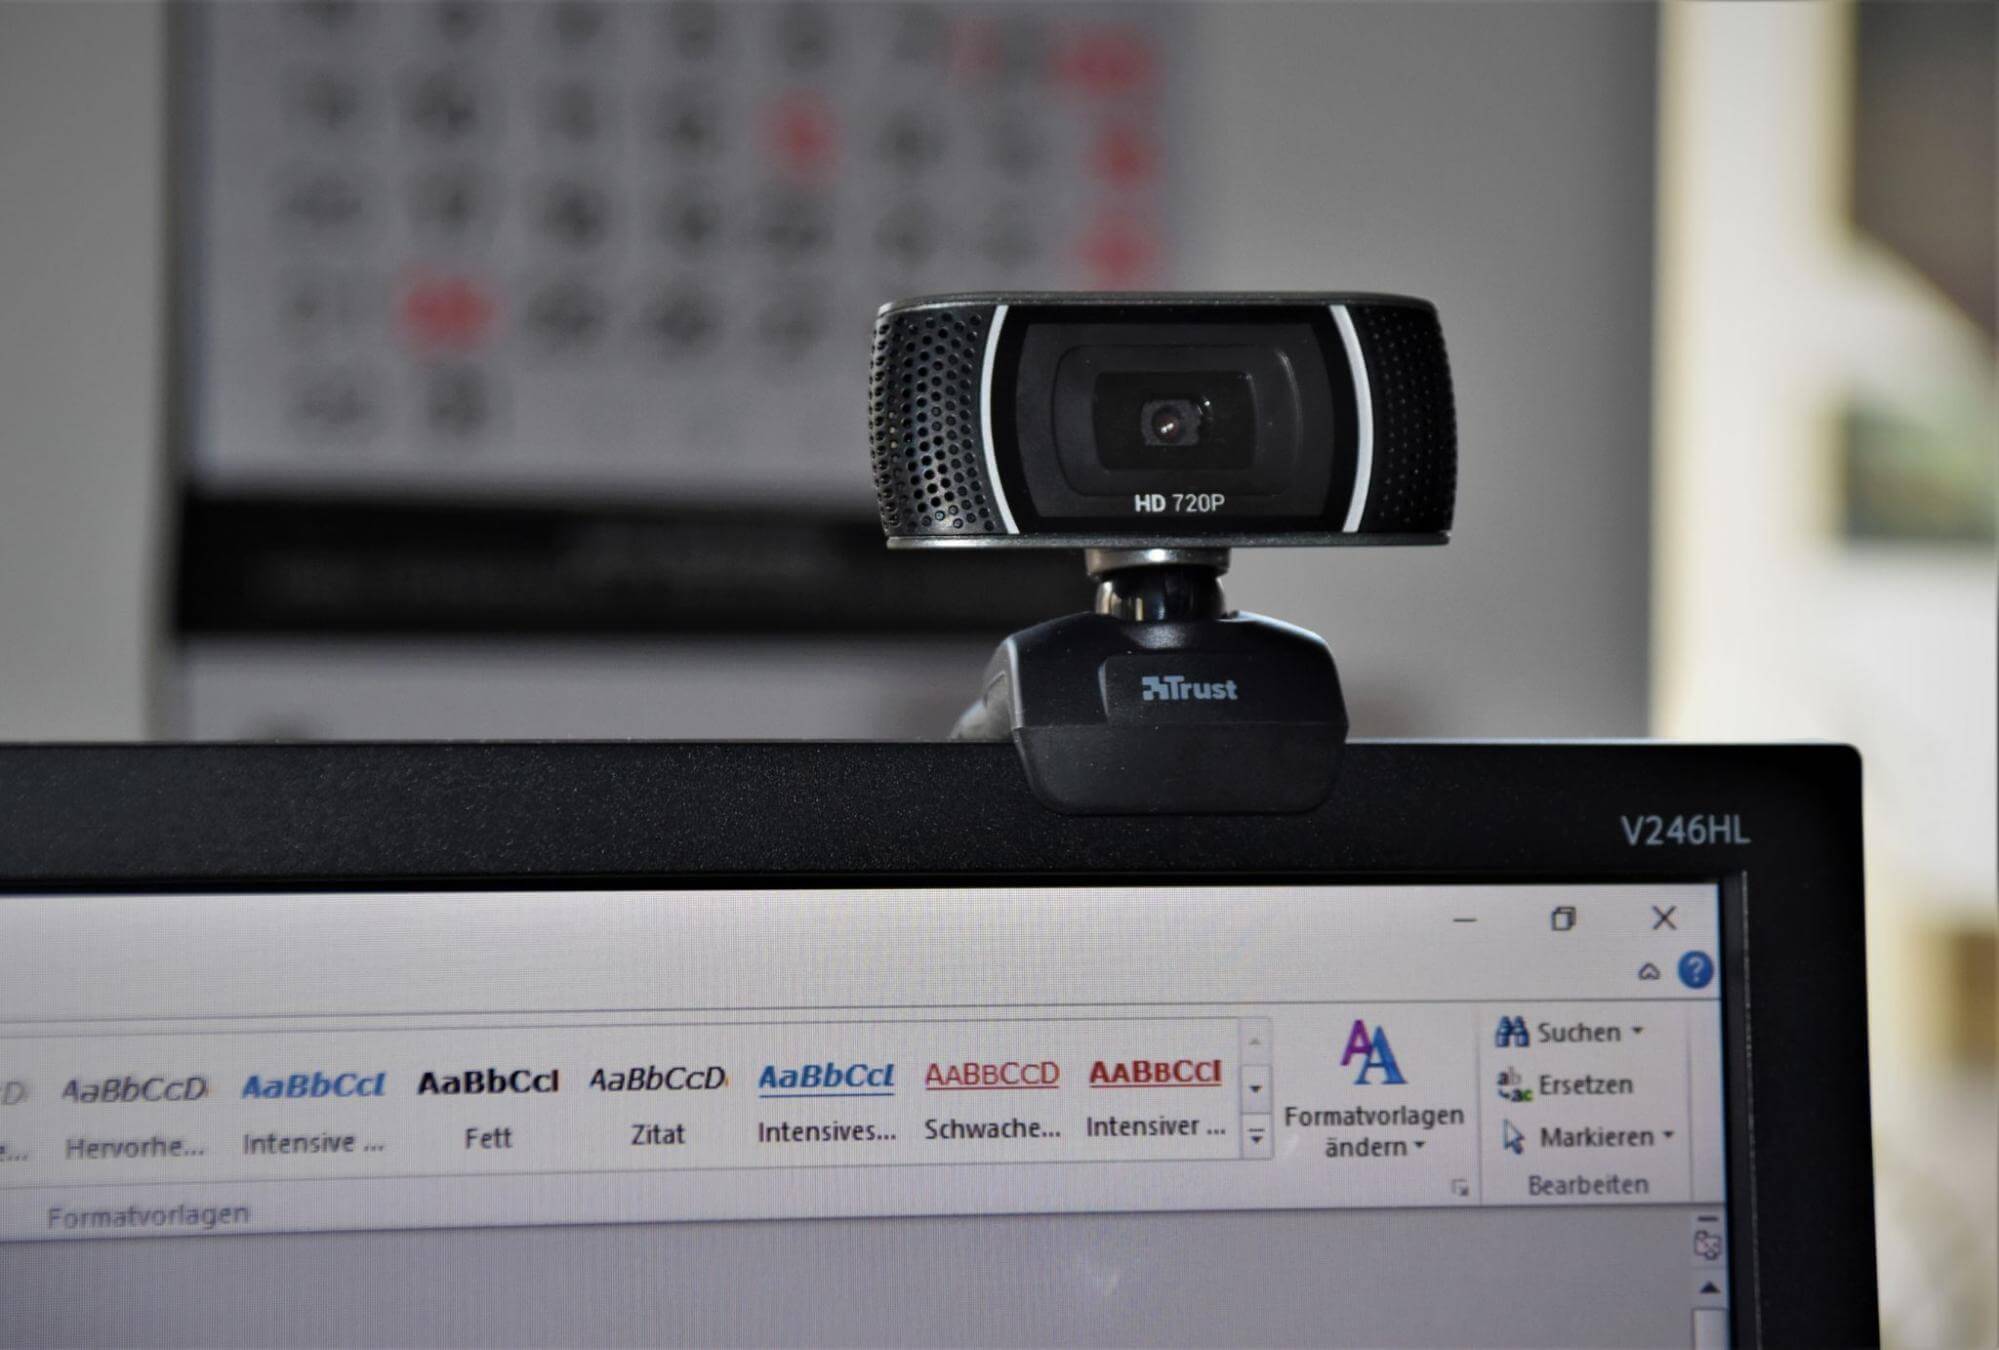 Webcam Selection: How to Choose the Best Webcam for My Laptop or